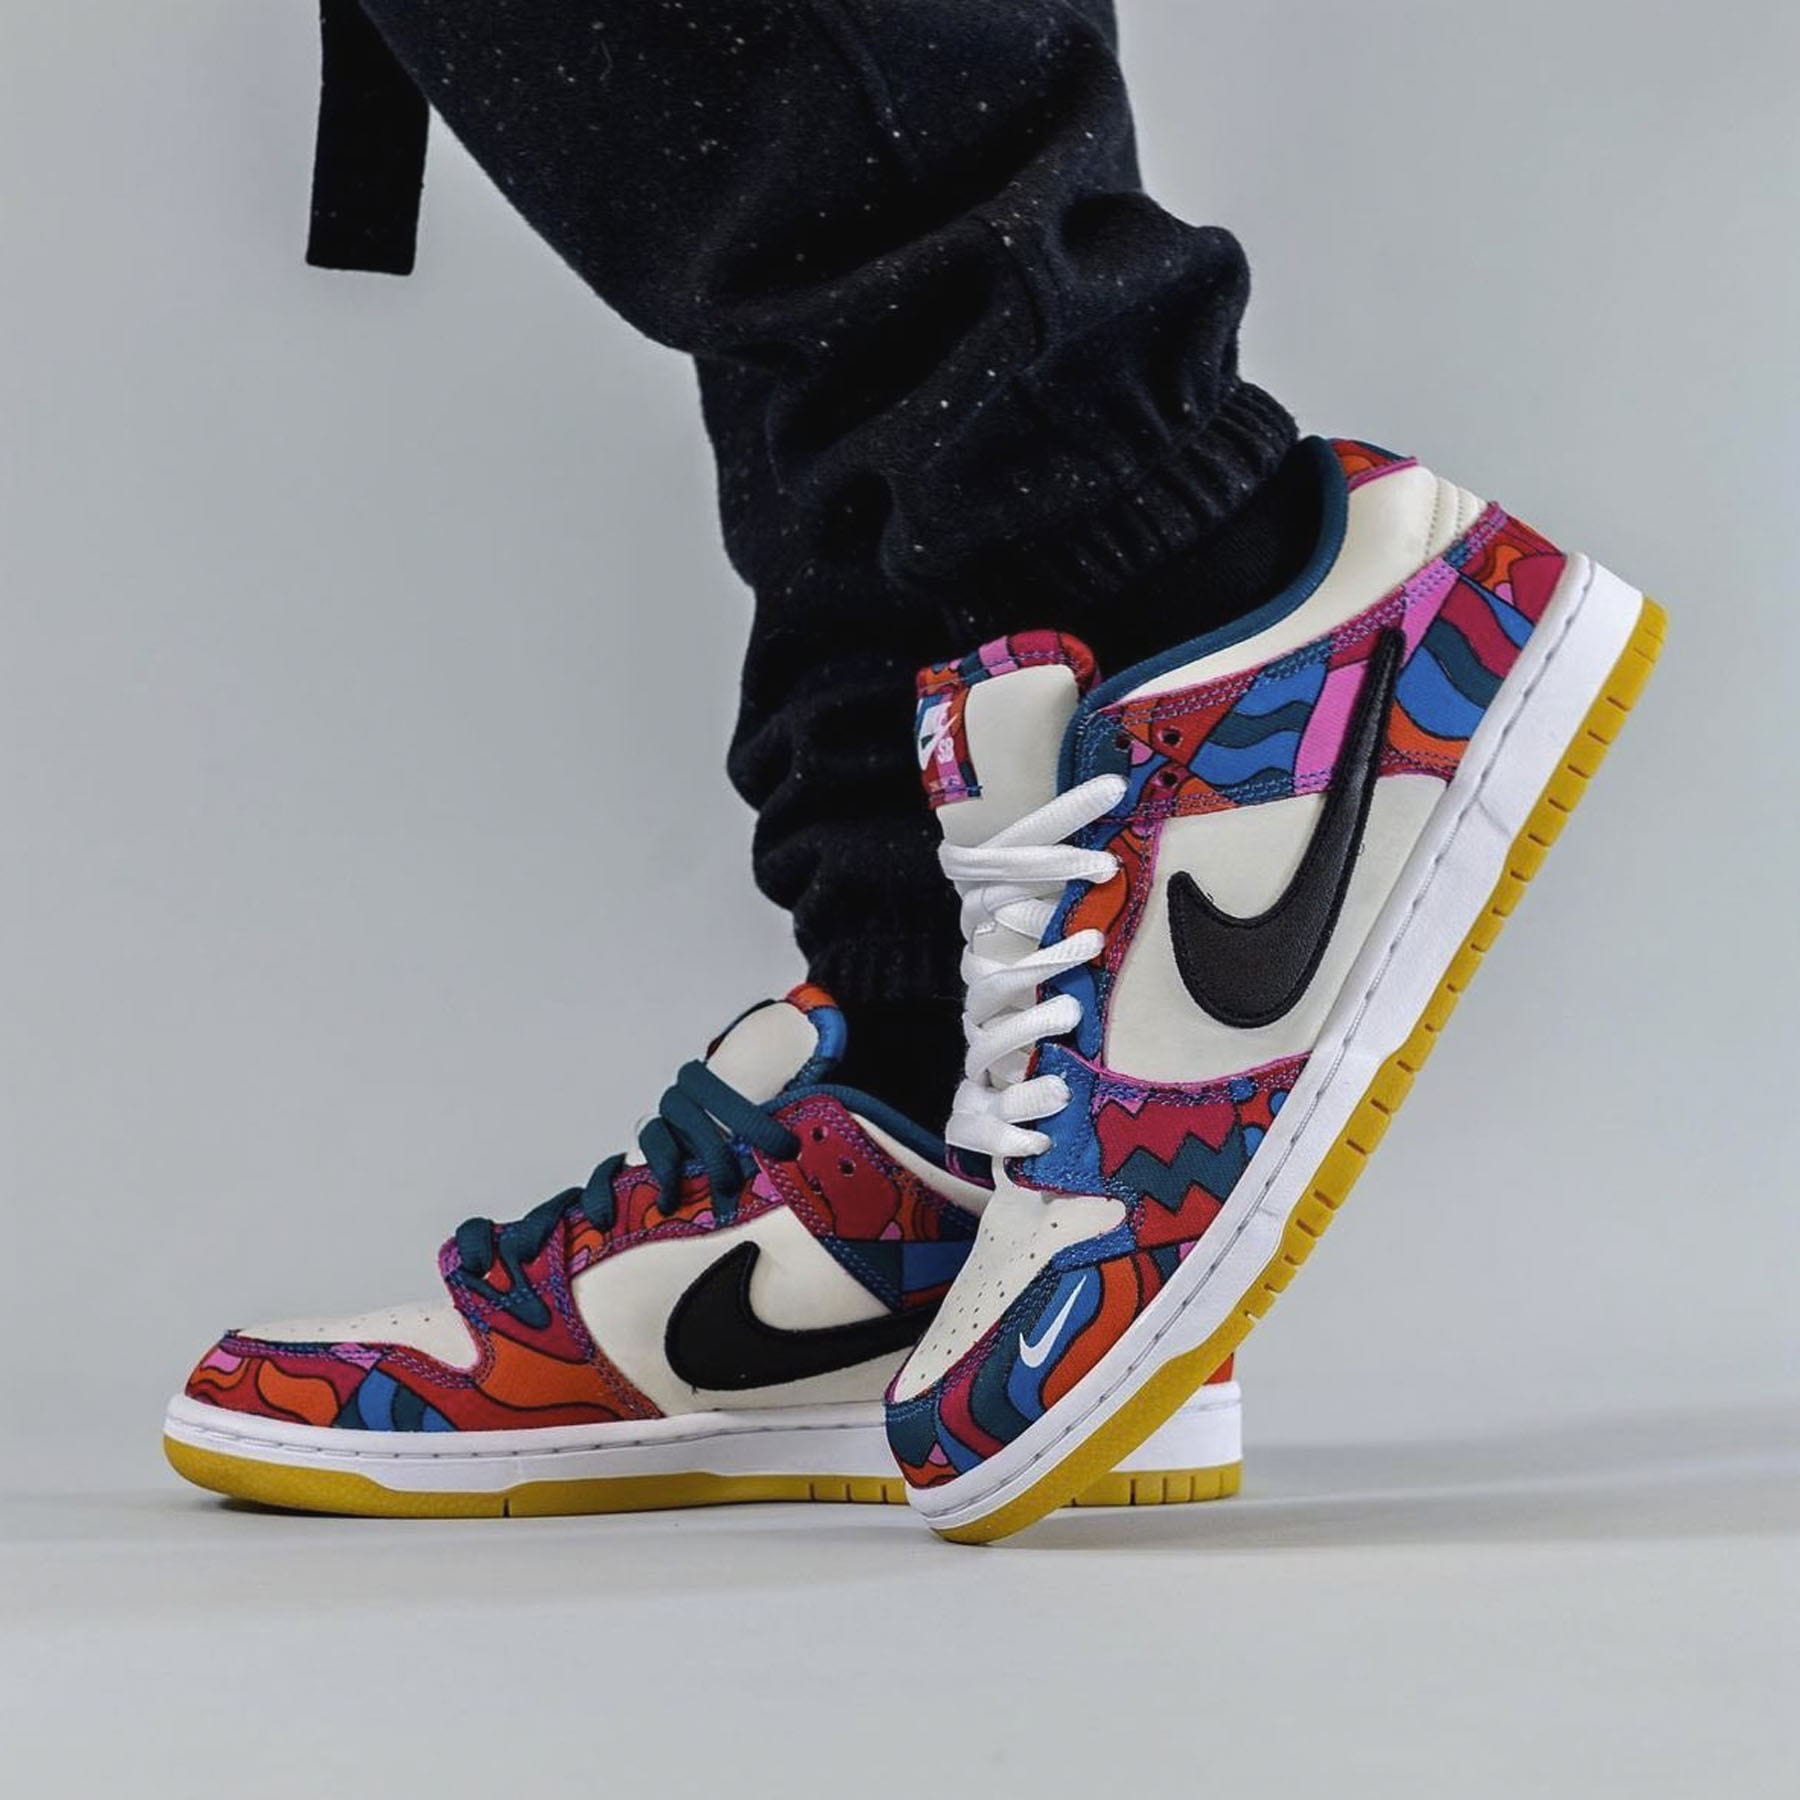 Parra x Nike Dunk Low Pro SB 'Abstract 